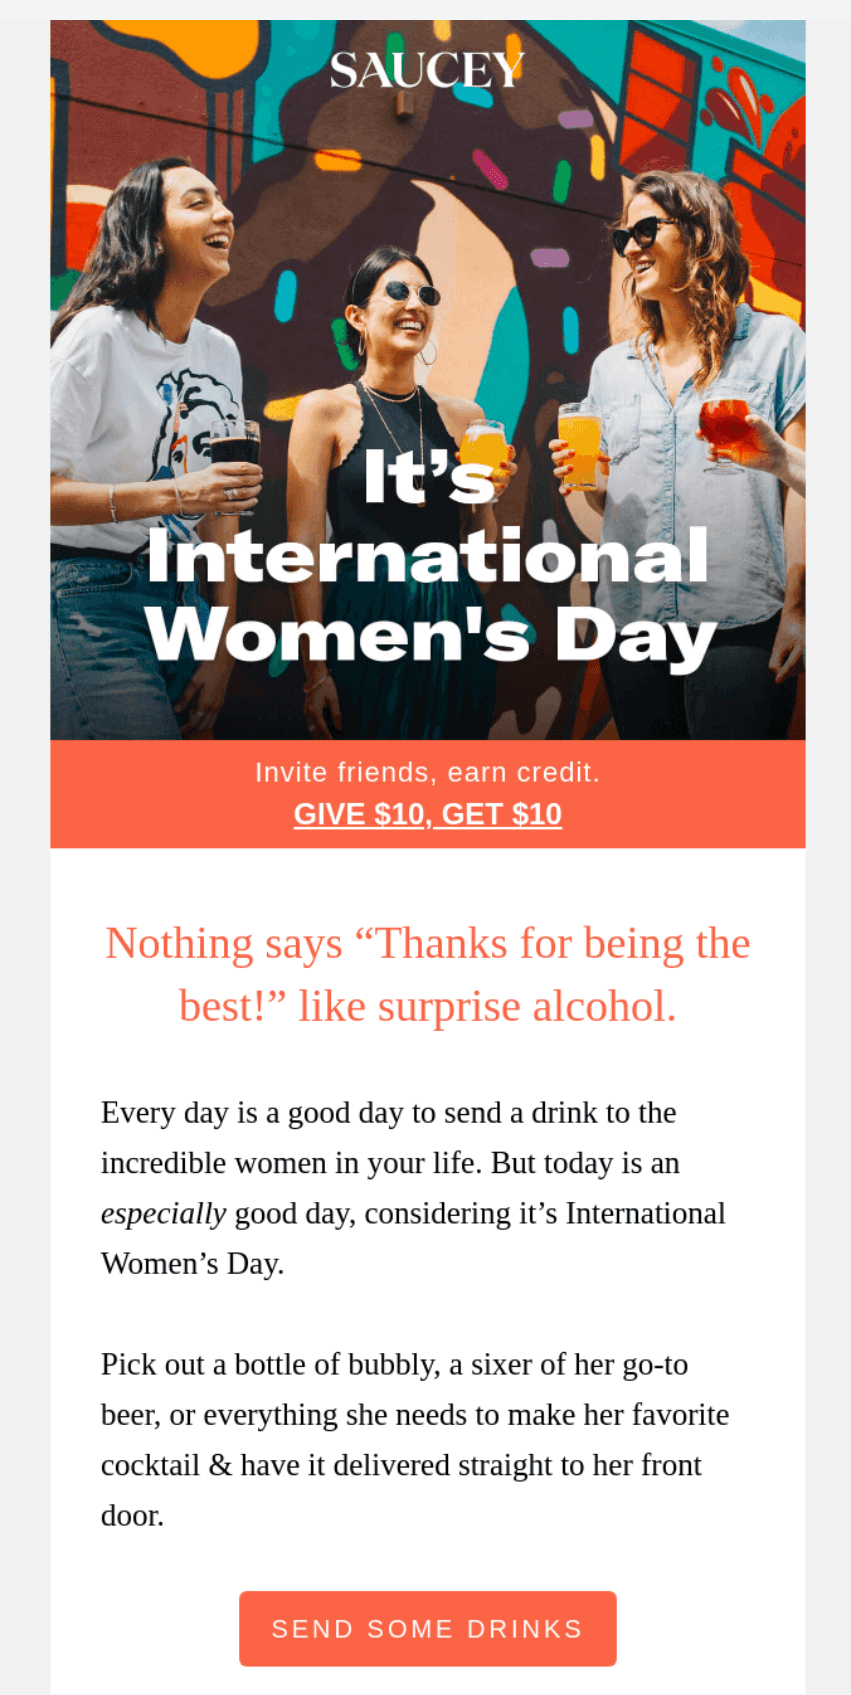 International Women’s Day email with a CTA “Send some drinks”